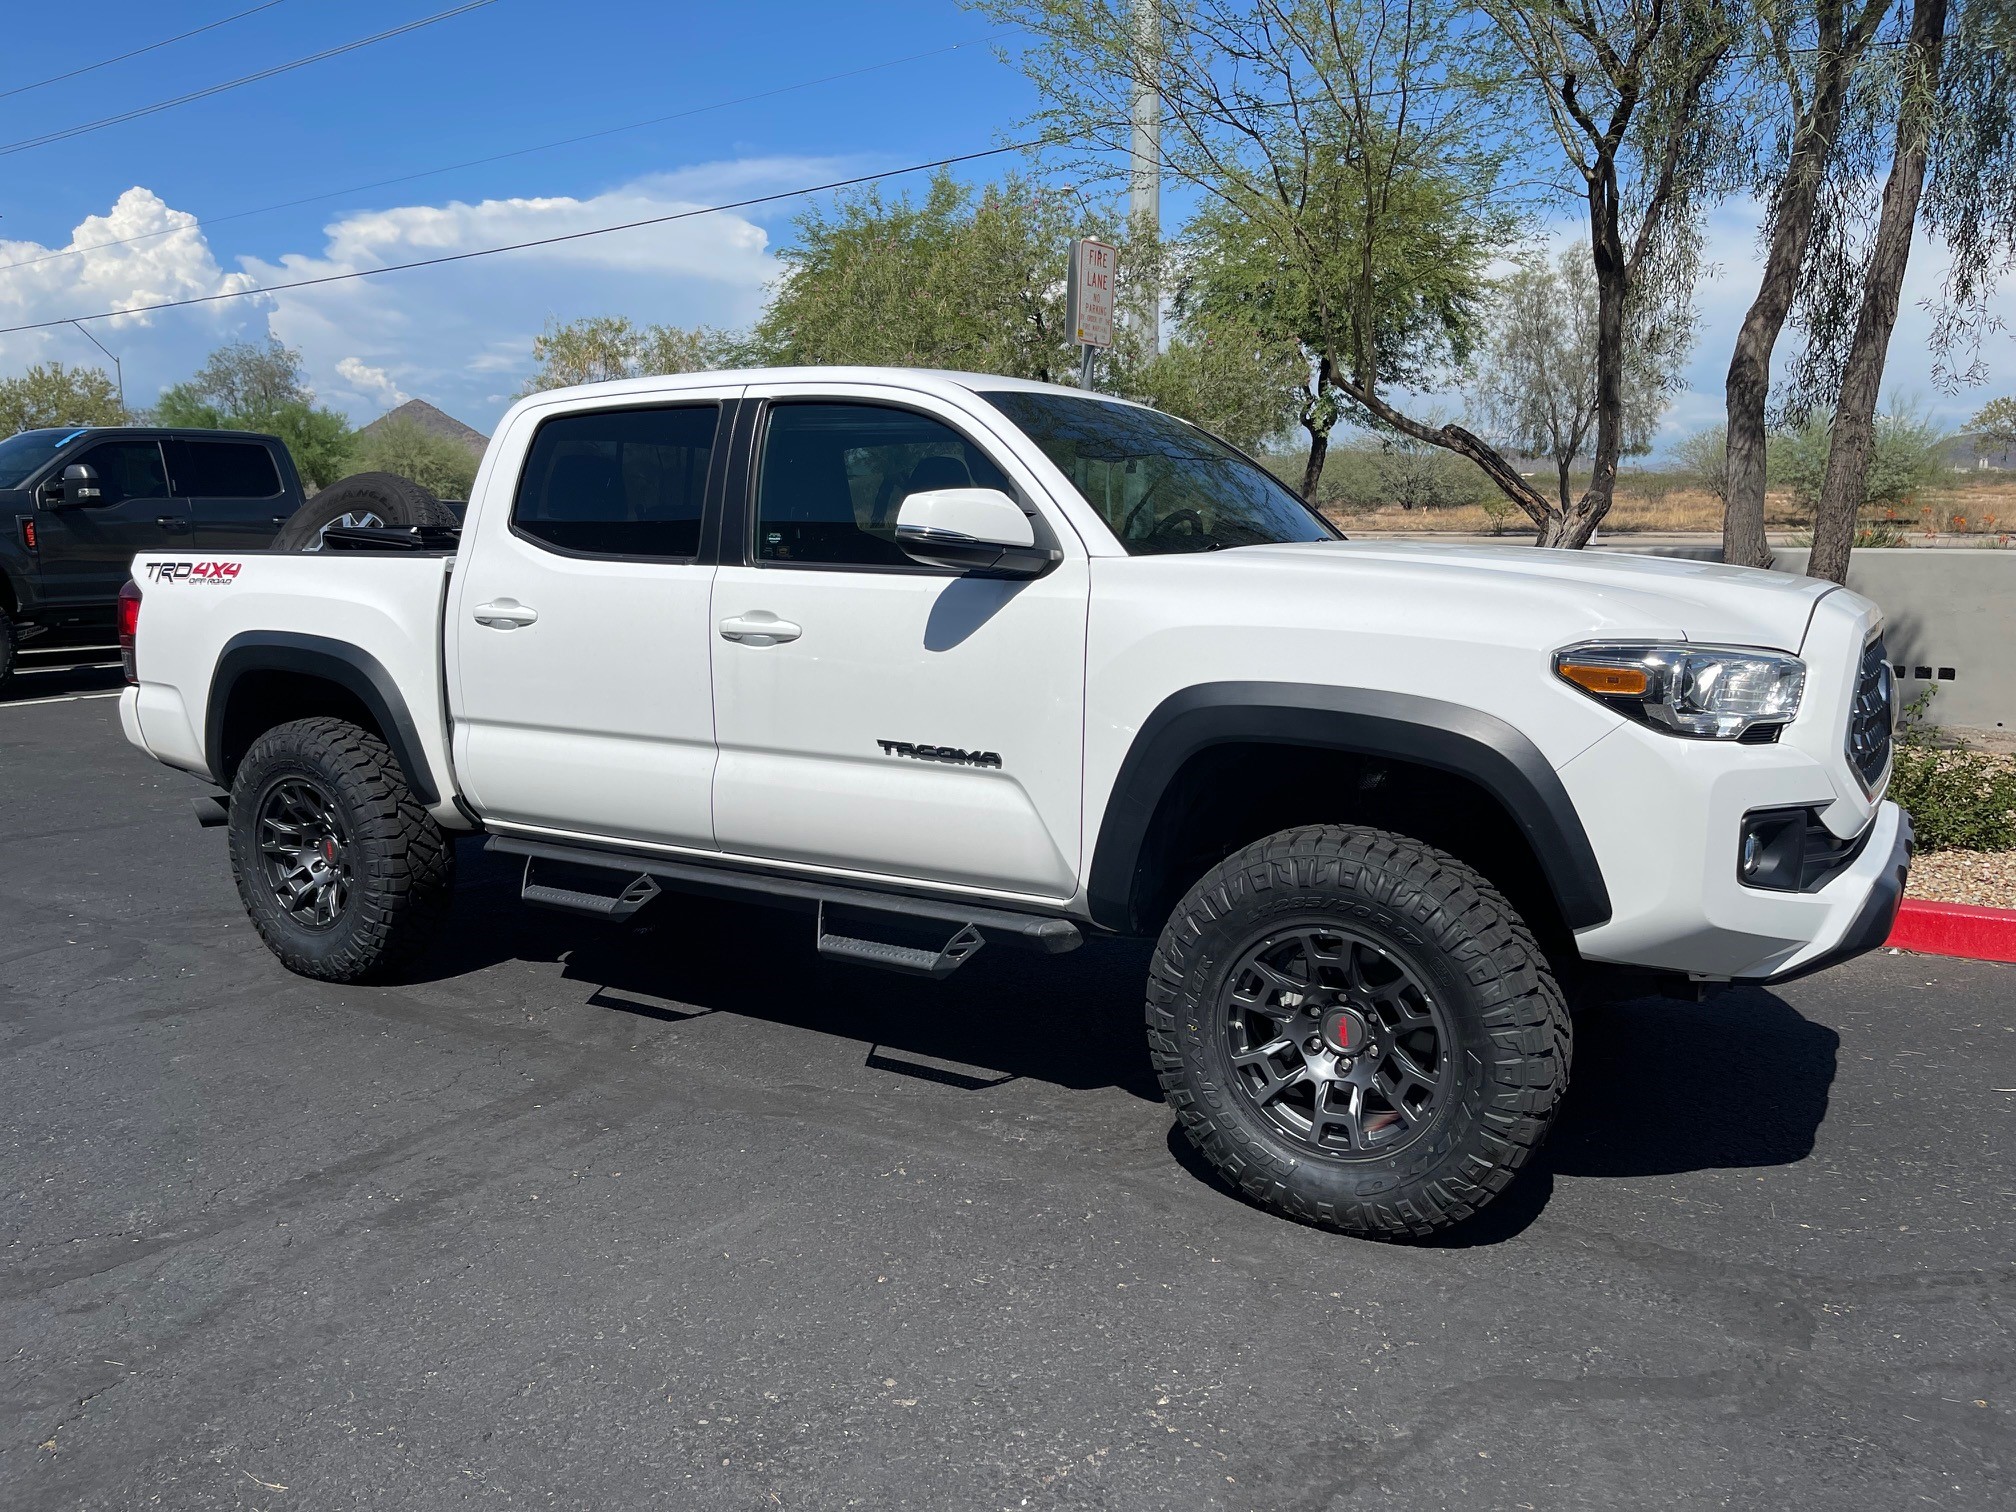 Toyota TRD OffRoad Preload Collar Lift Kit (FRONT ONLY